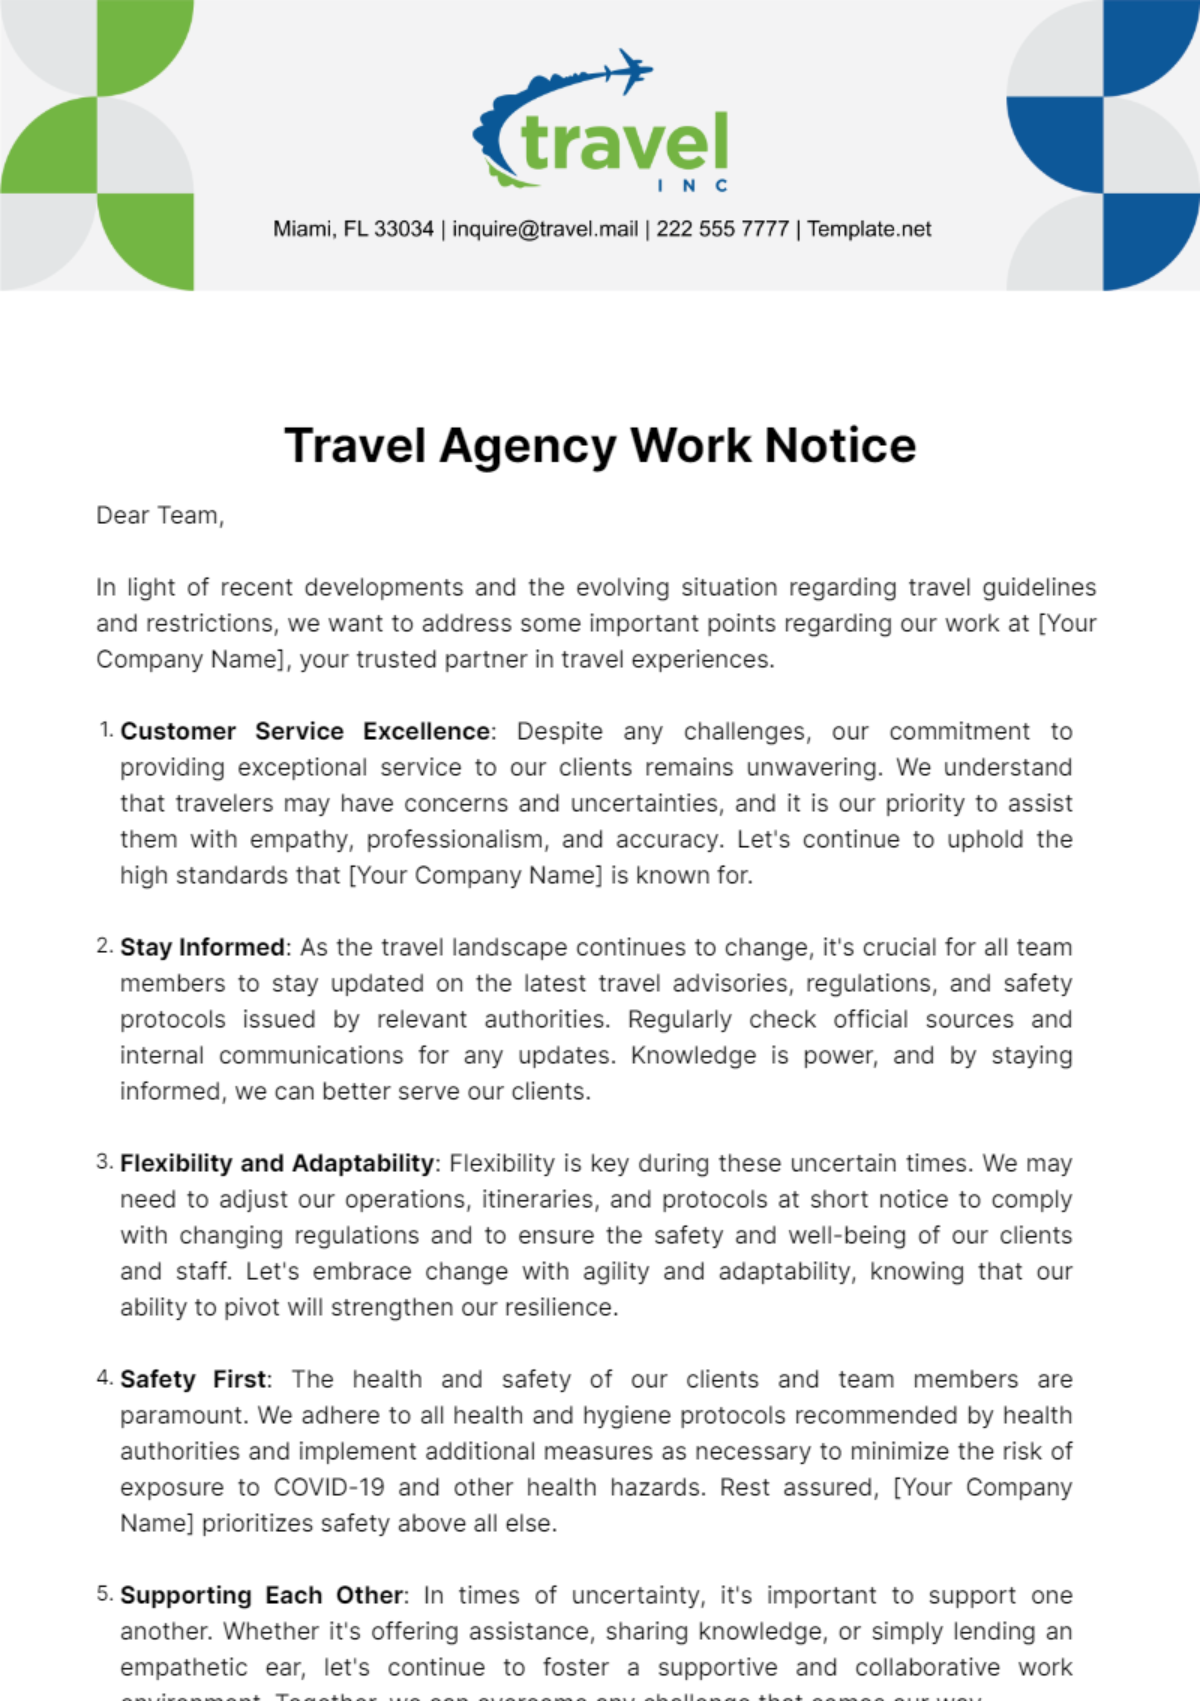 Free Travel Agency Work Notice Template